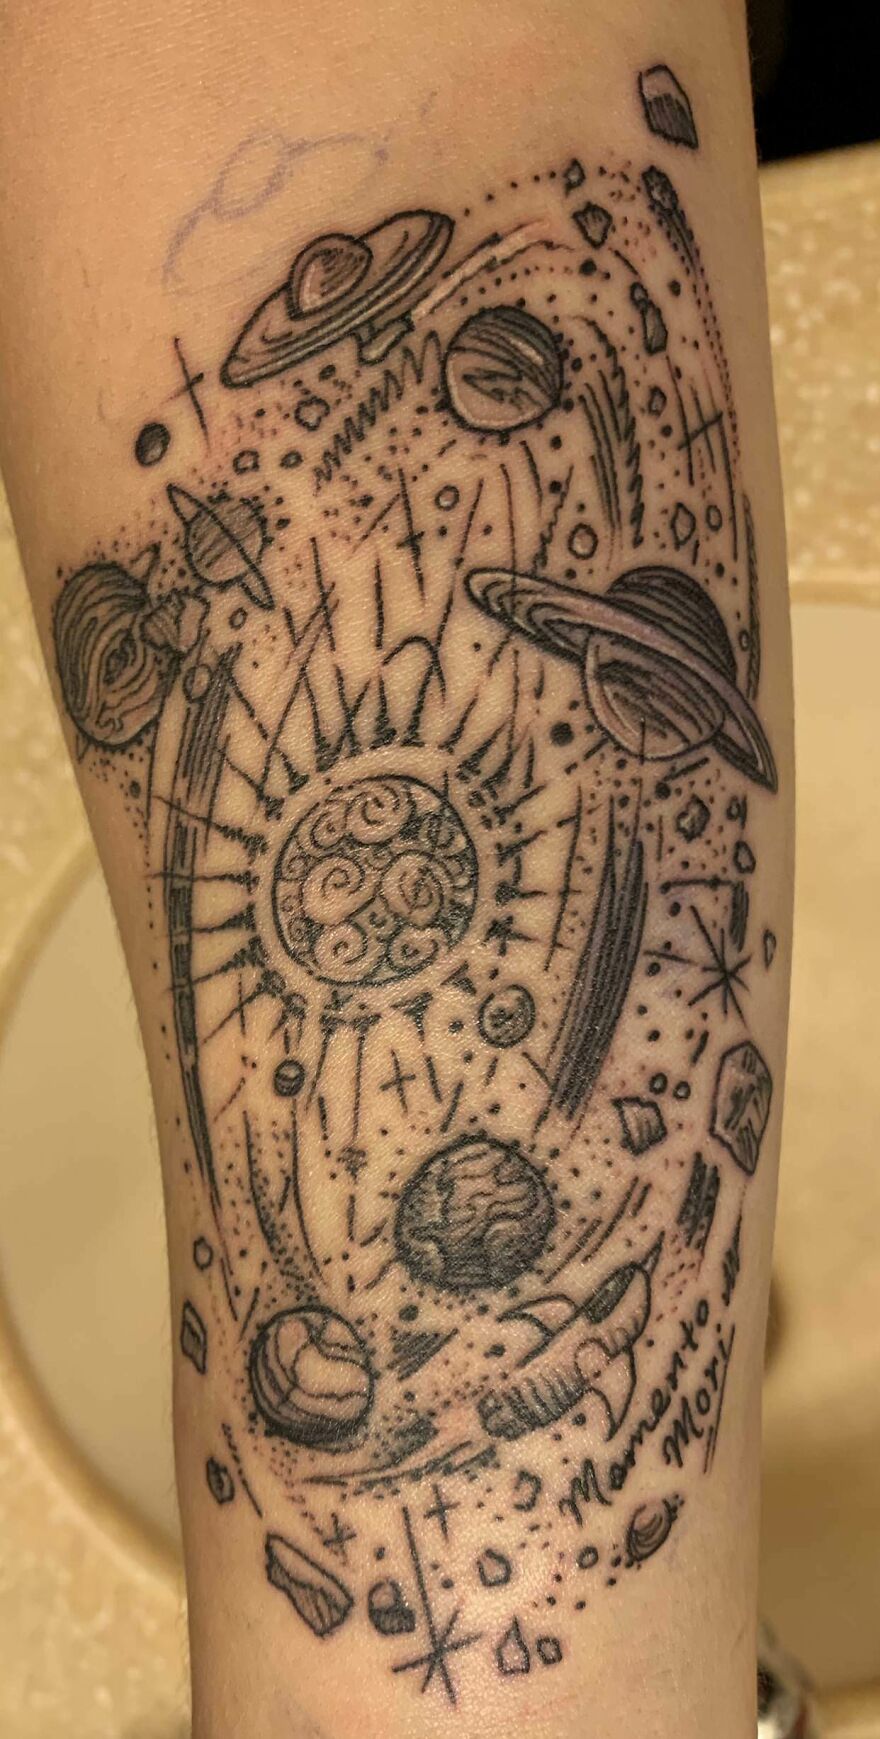 Planets and space tattoo